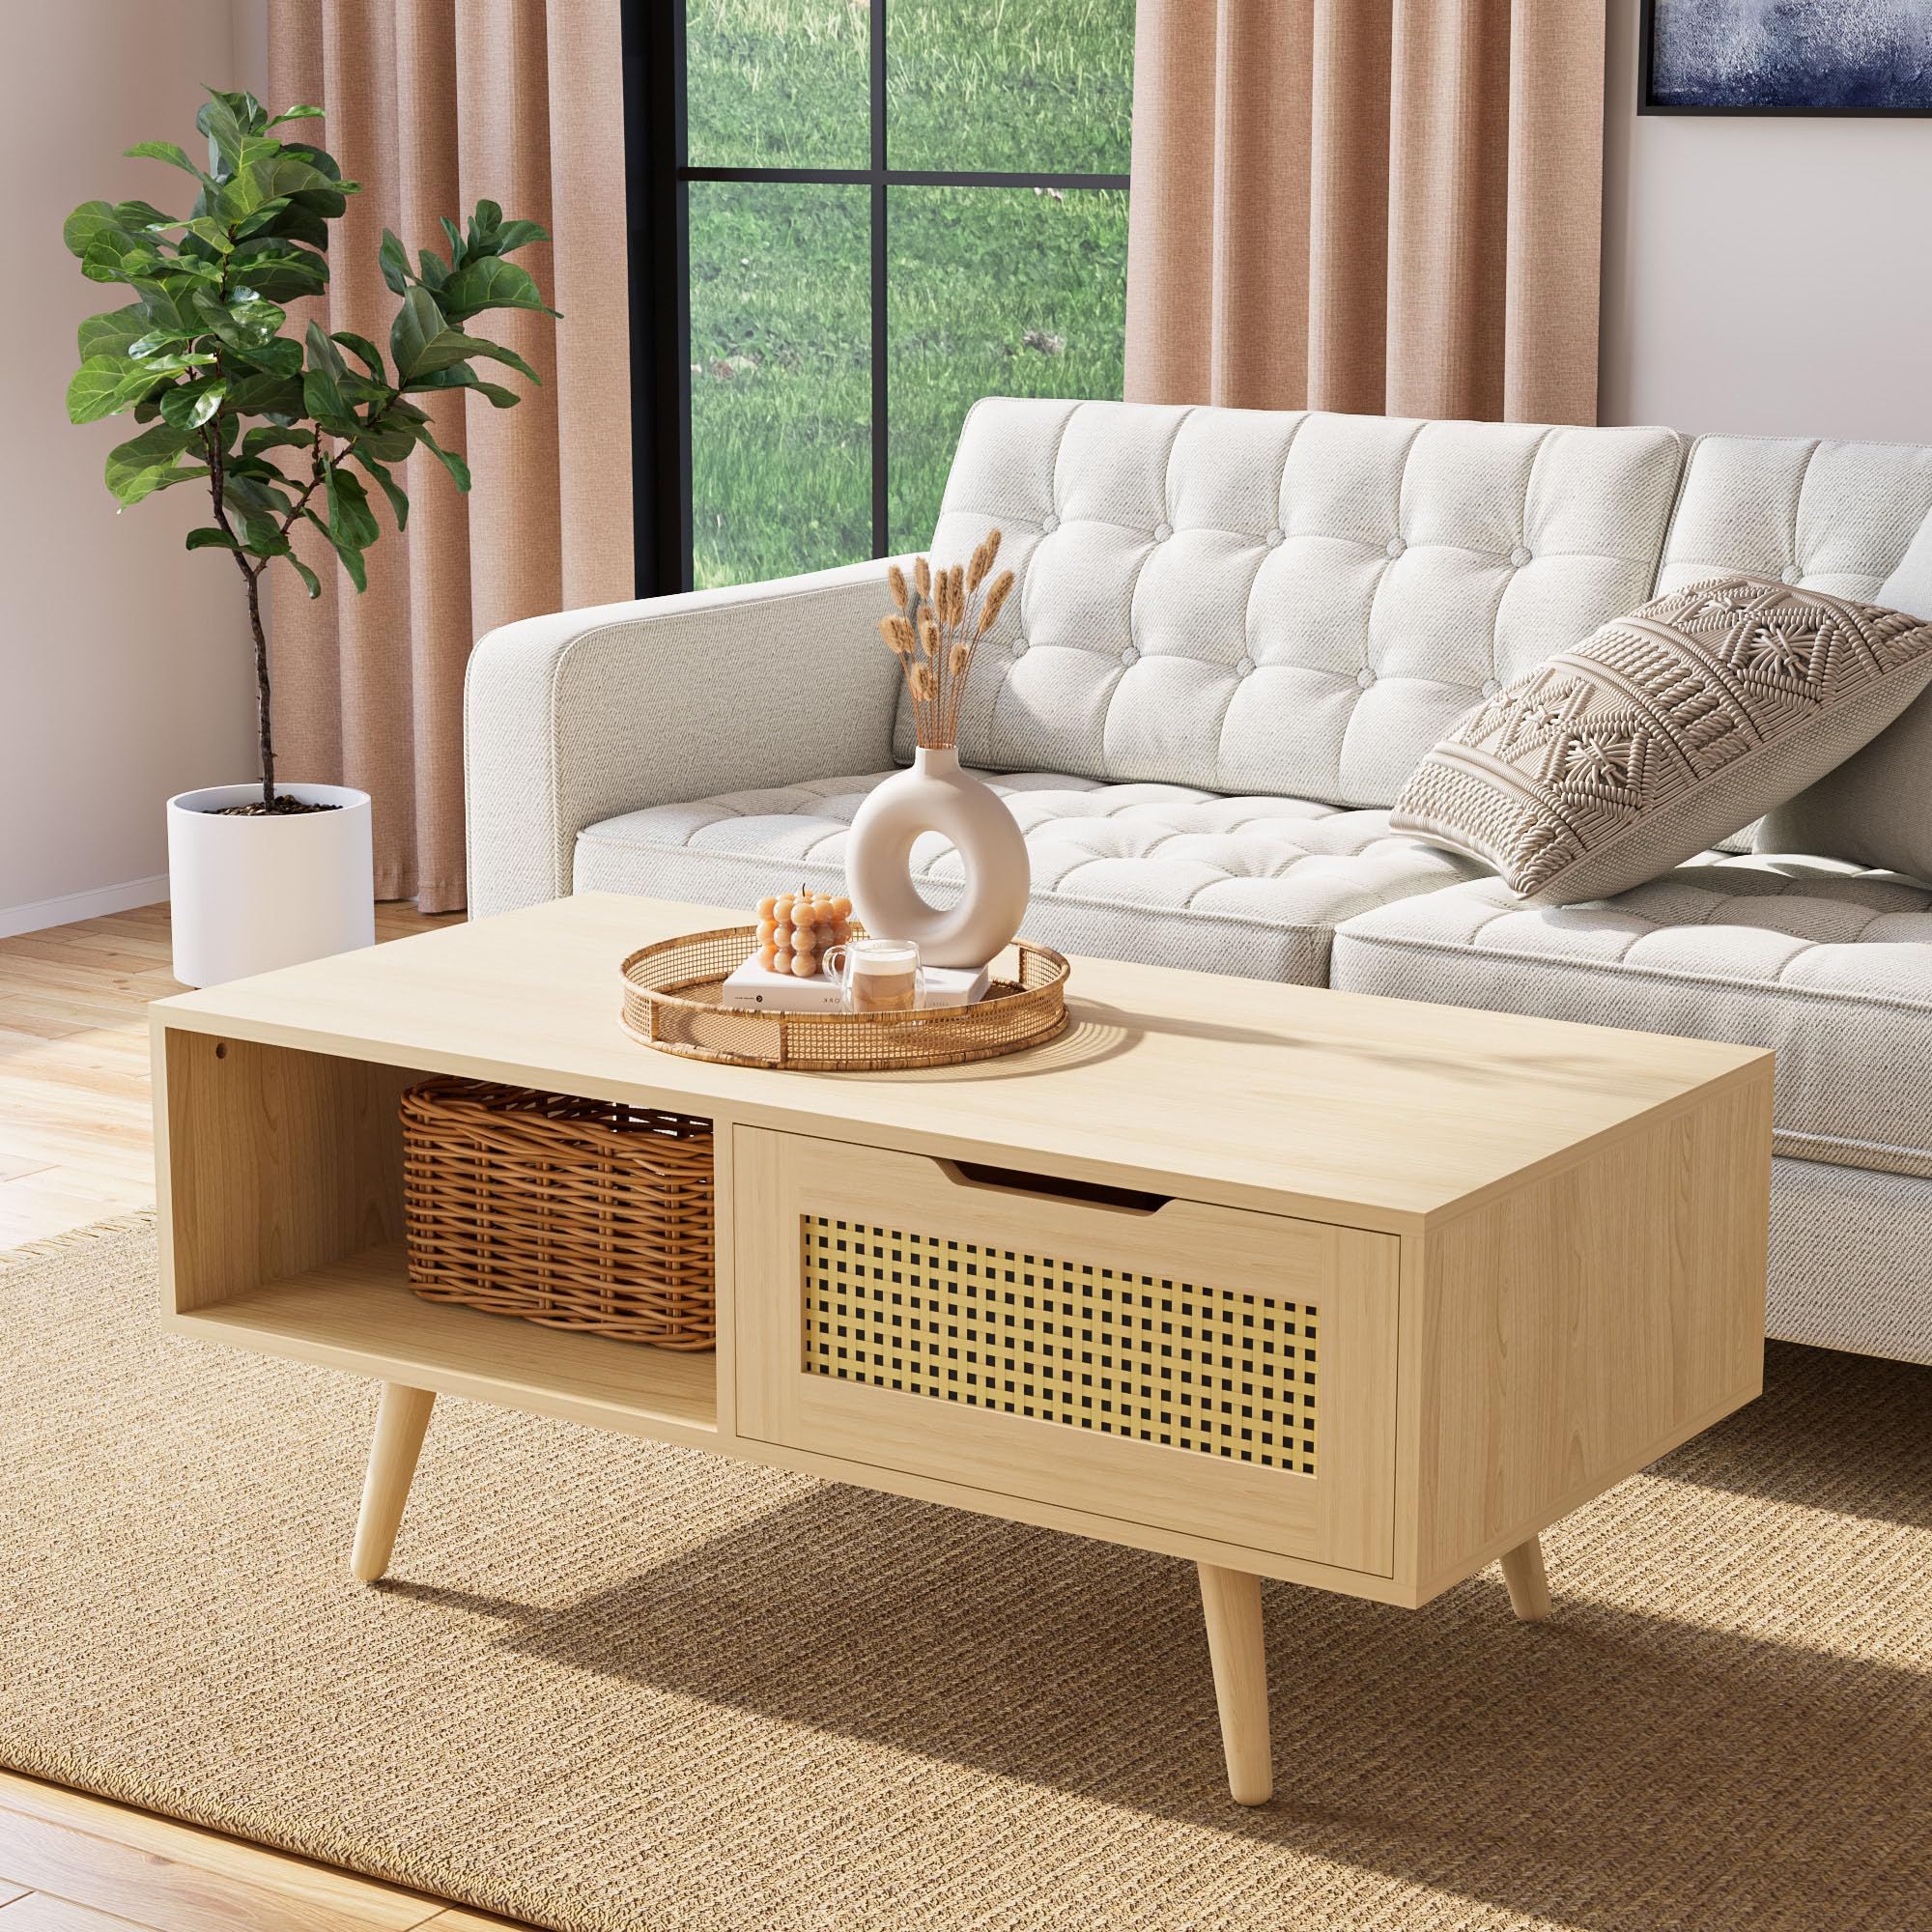 Favorite Cozy Castle Boho Living Room Tables Pertaining To Amazon: Cozy Castle Boho Coffee Table With Storage, 39'' Rattan Living  Room Tables With Solid Legs, Mid Century Modern Coffee Table For Living Room,  Oak : Home & Kitchen (Photo 1 of 10)